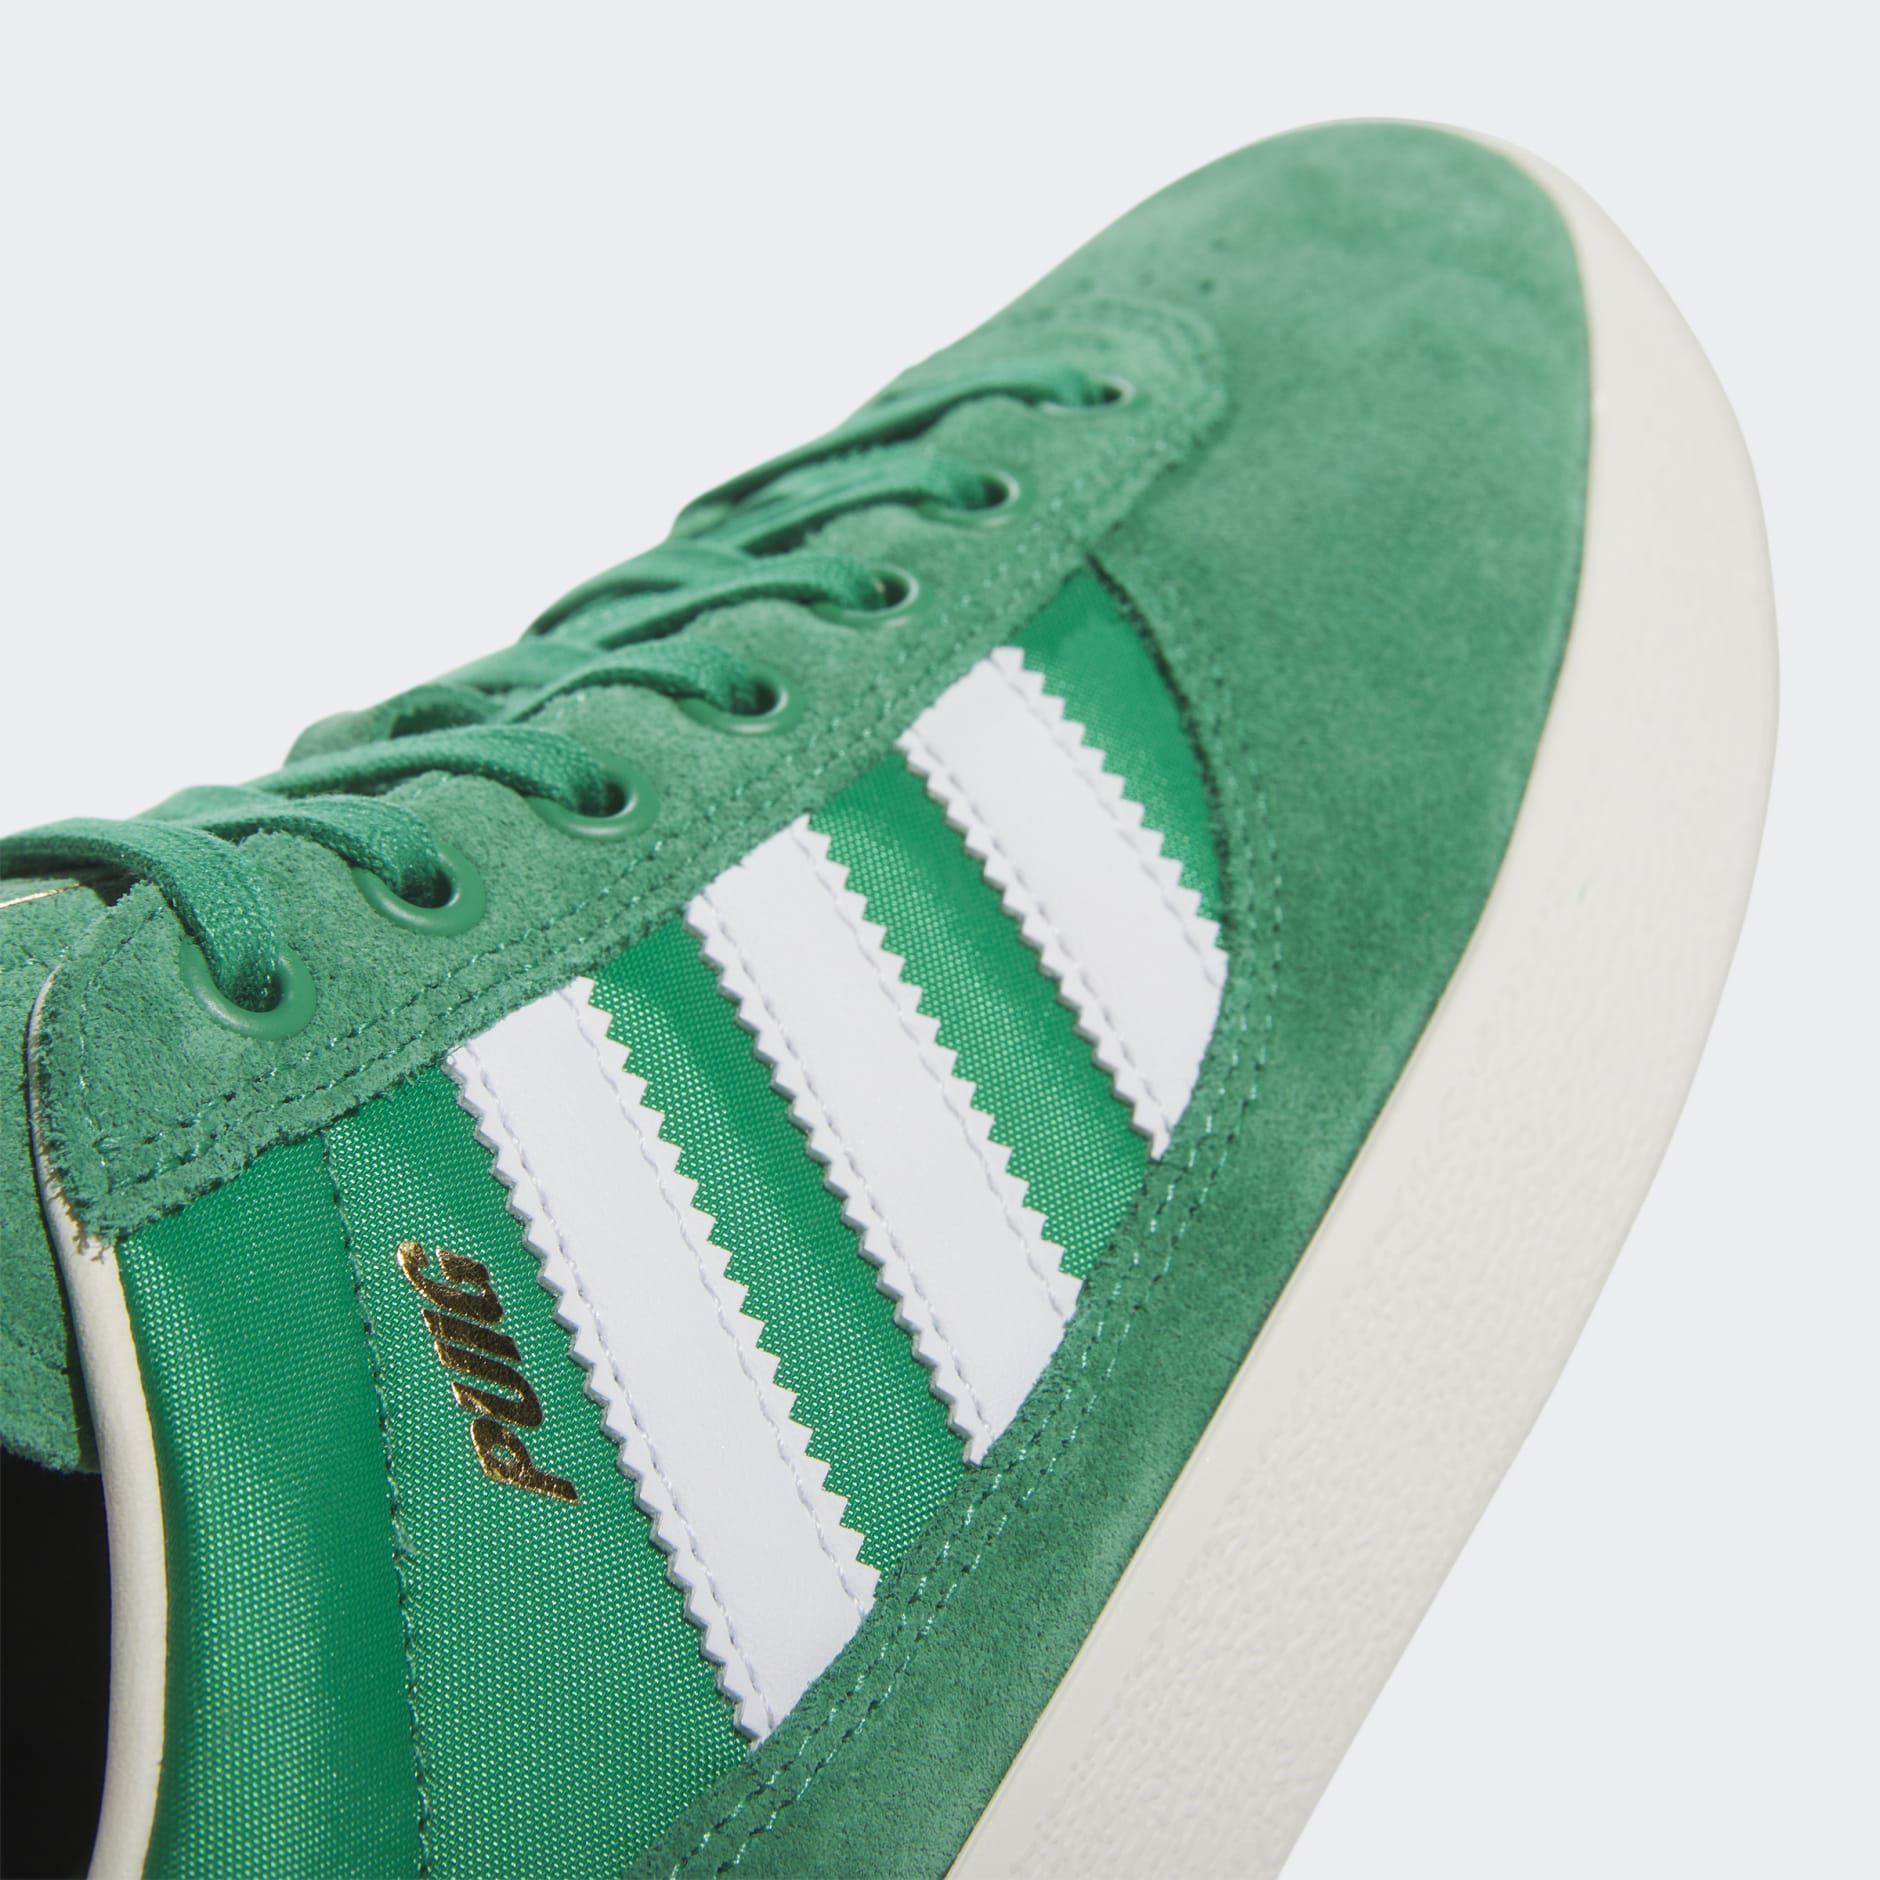 Shoes - Puig Indoor Shoes - Green | adidas South Africa